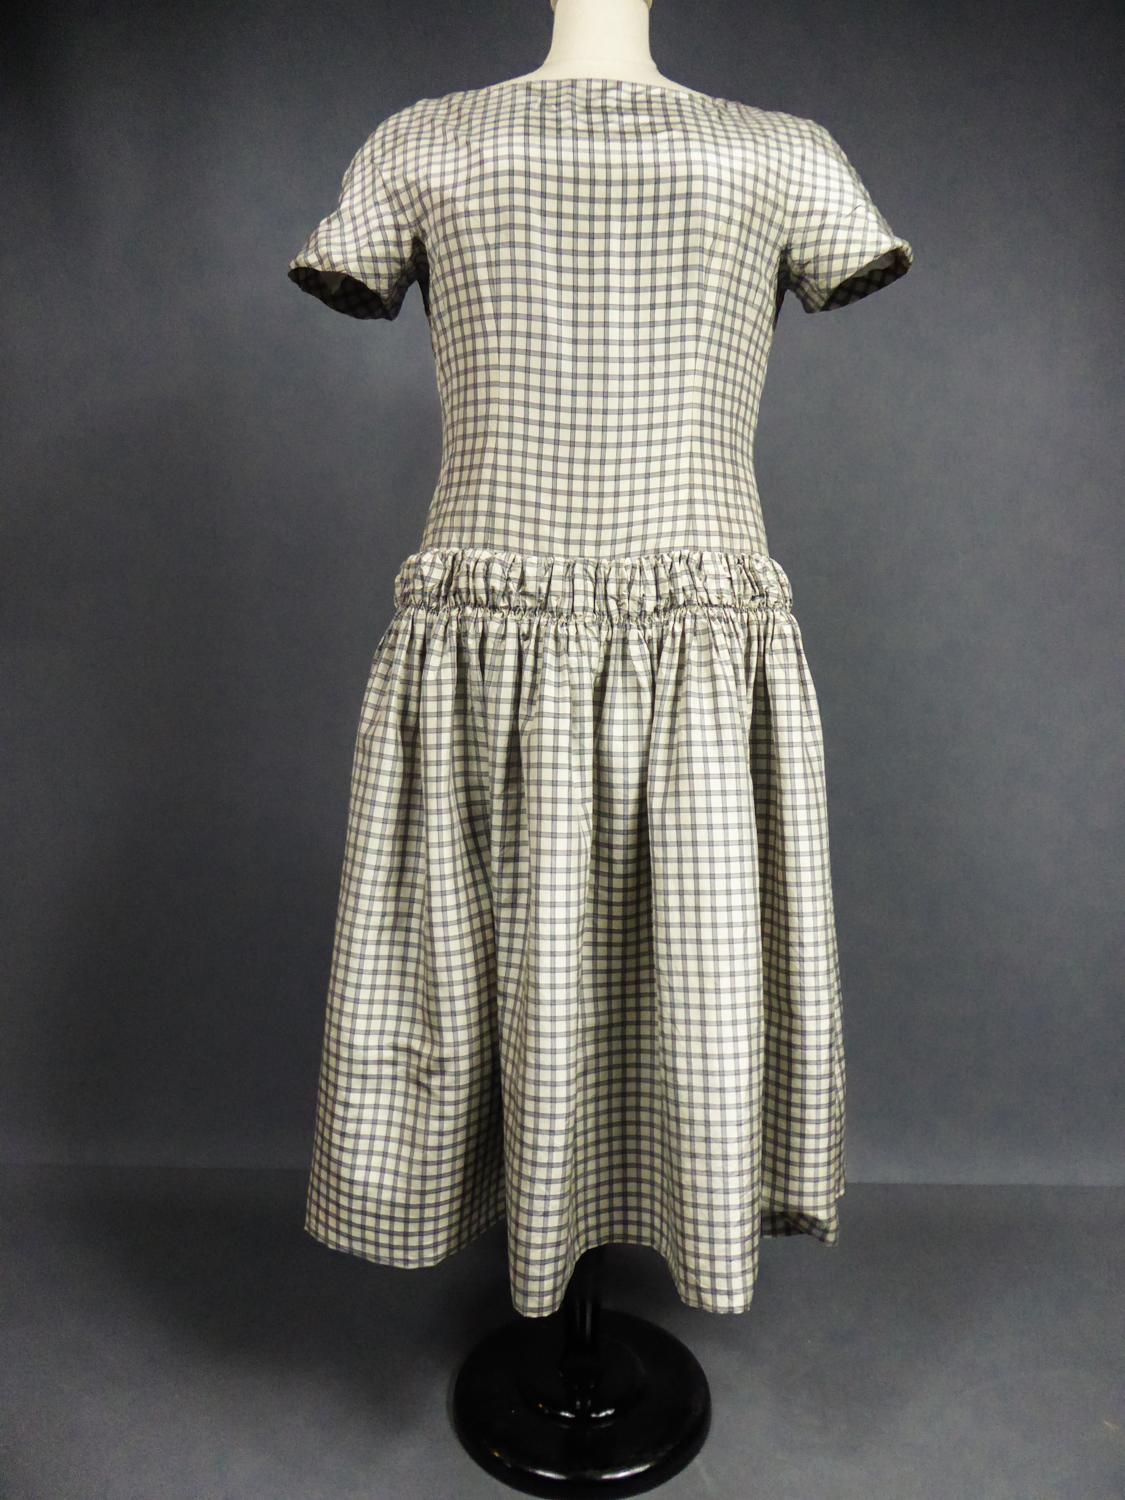 Circa 1955/1960
France

Historic dress from the Sac or Baby Doll line by Cristobal Balenciaga, Spanish master of Haute Couture numbered 55418 and dating from the years 1955-1960. Dress in very fine taffeta with gray and black checks on an off-white